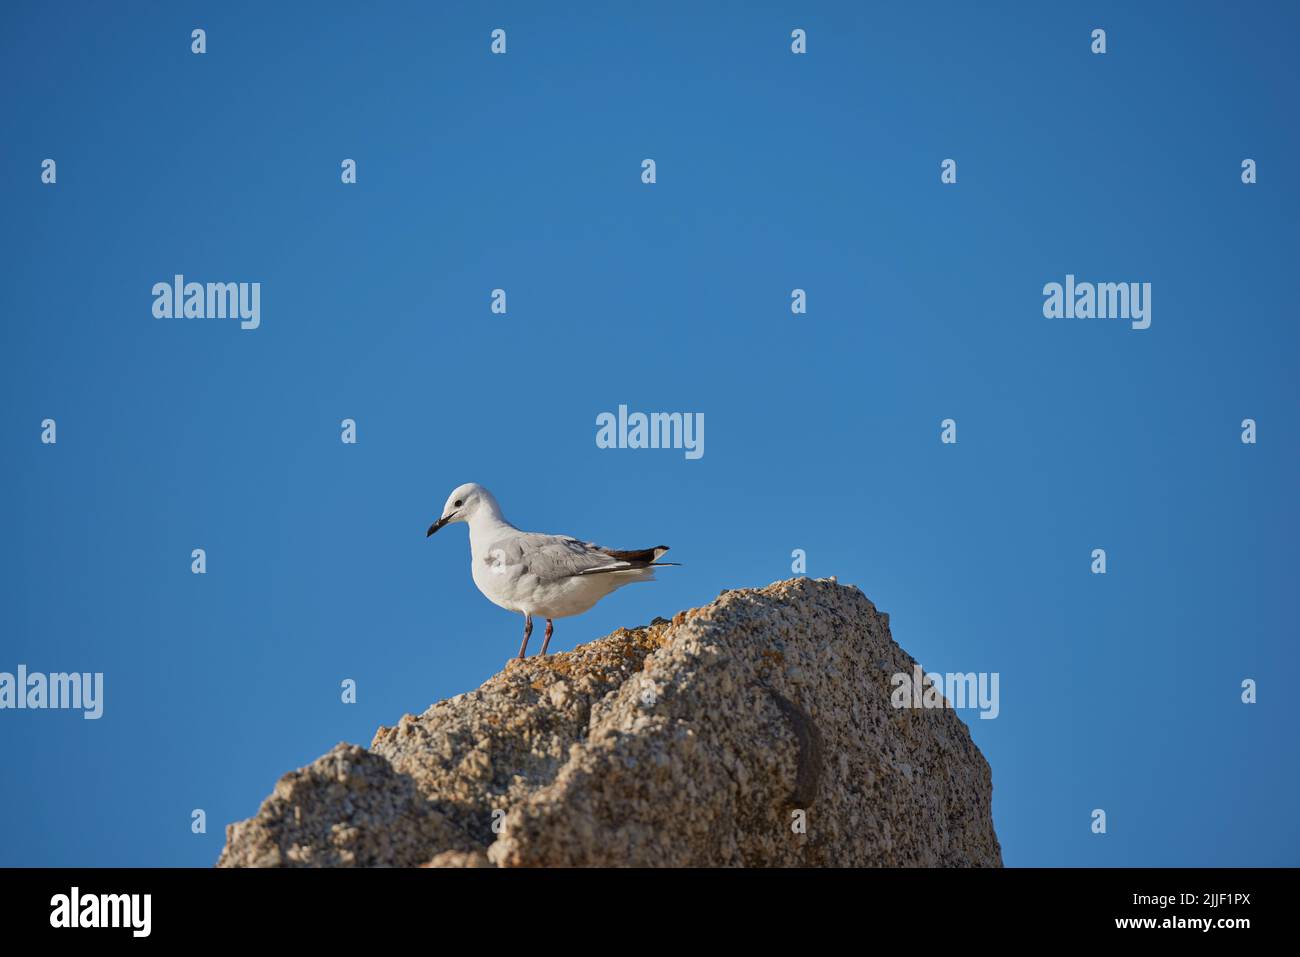 Lonely seagull struggling to find food due to effects of climate change and rising sea levels. Wildlife landscape with a bird on a boulder or rock Stock Photo